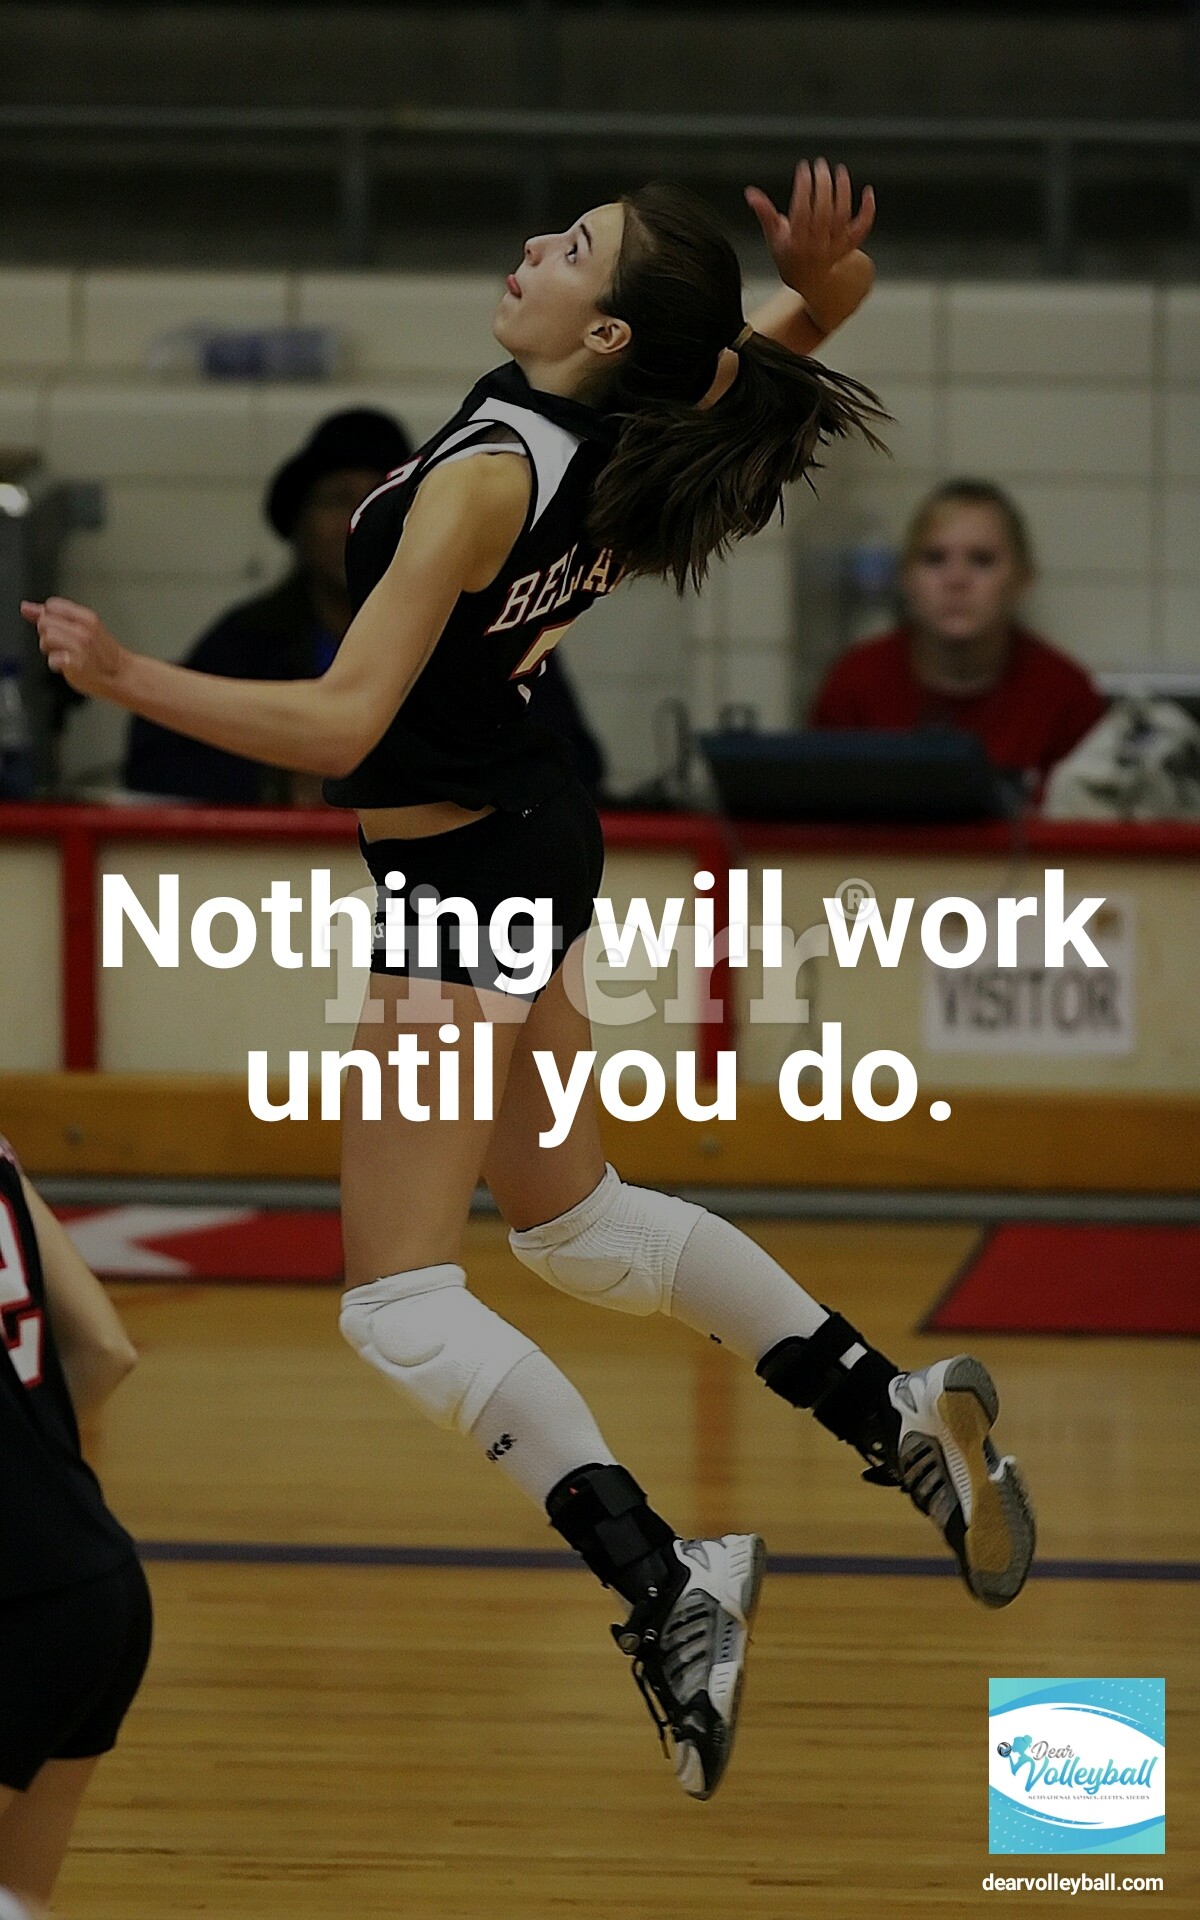 Nothing will work until you do and 54 short inspirational quotes on DearVolleyball.com